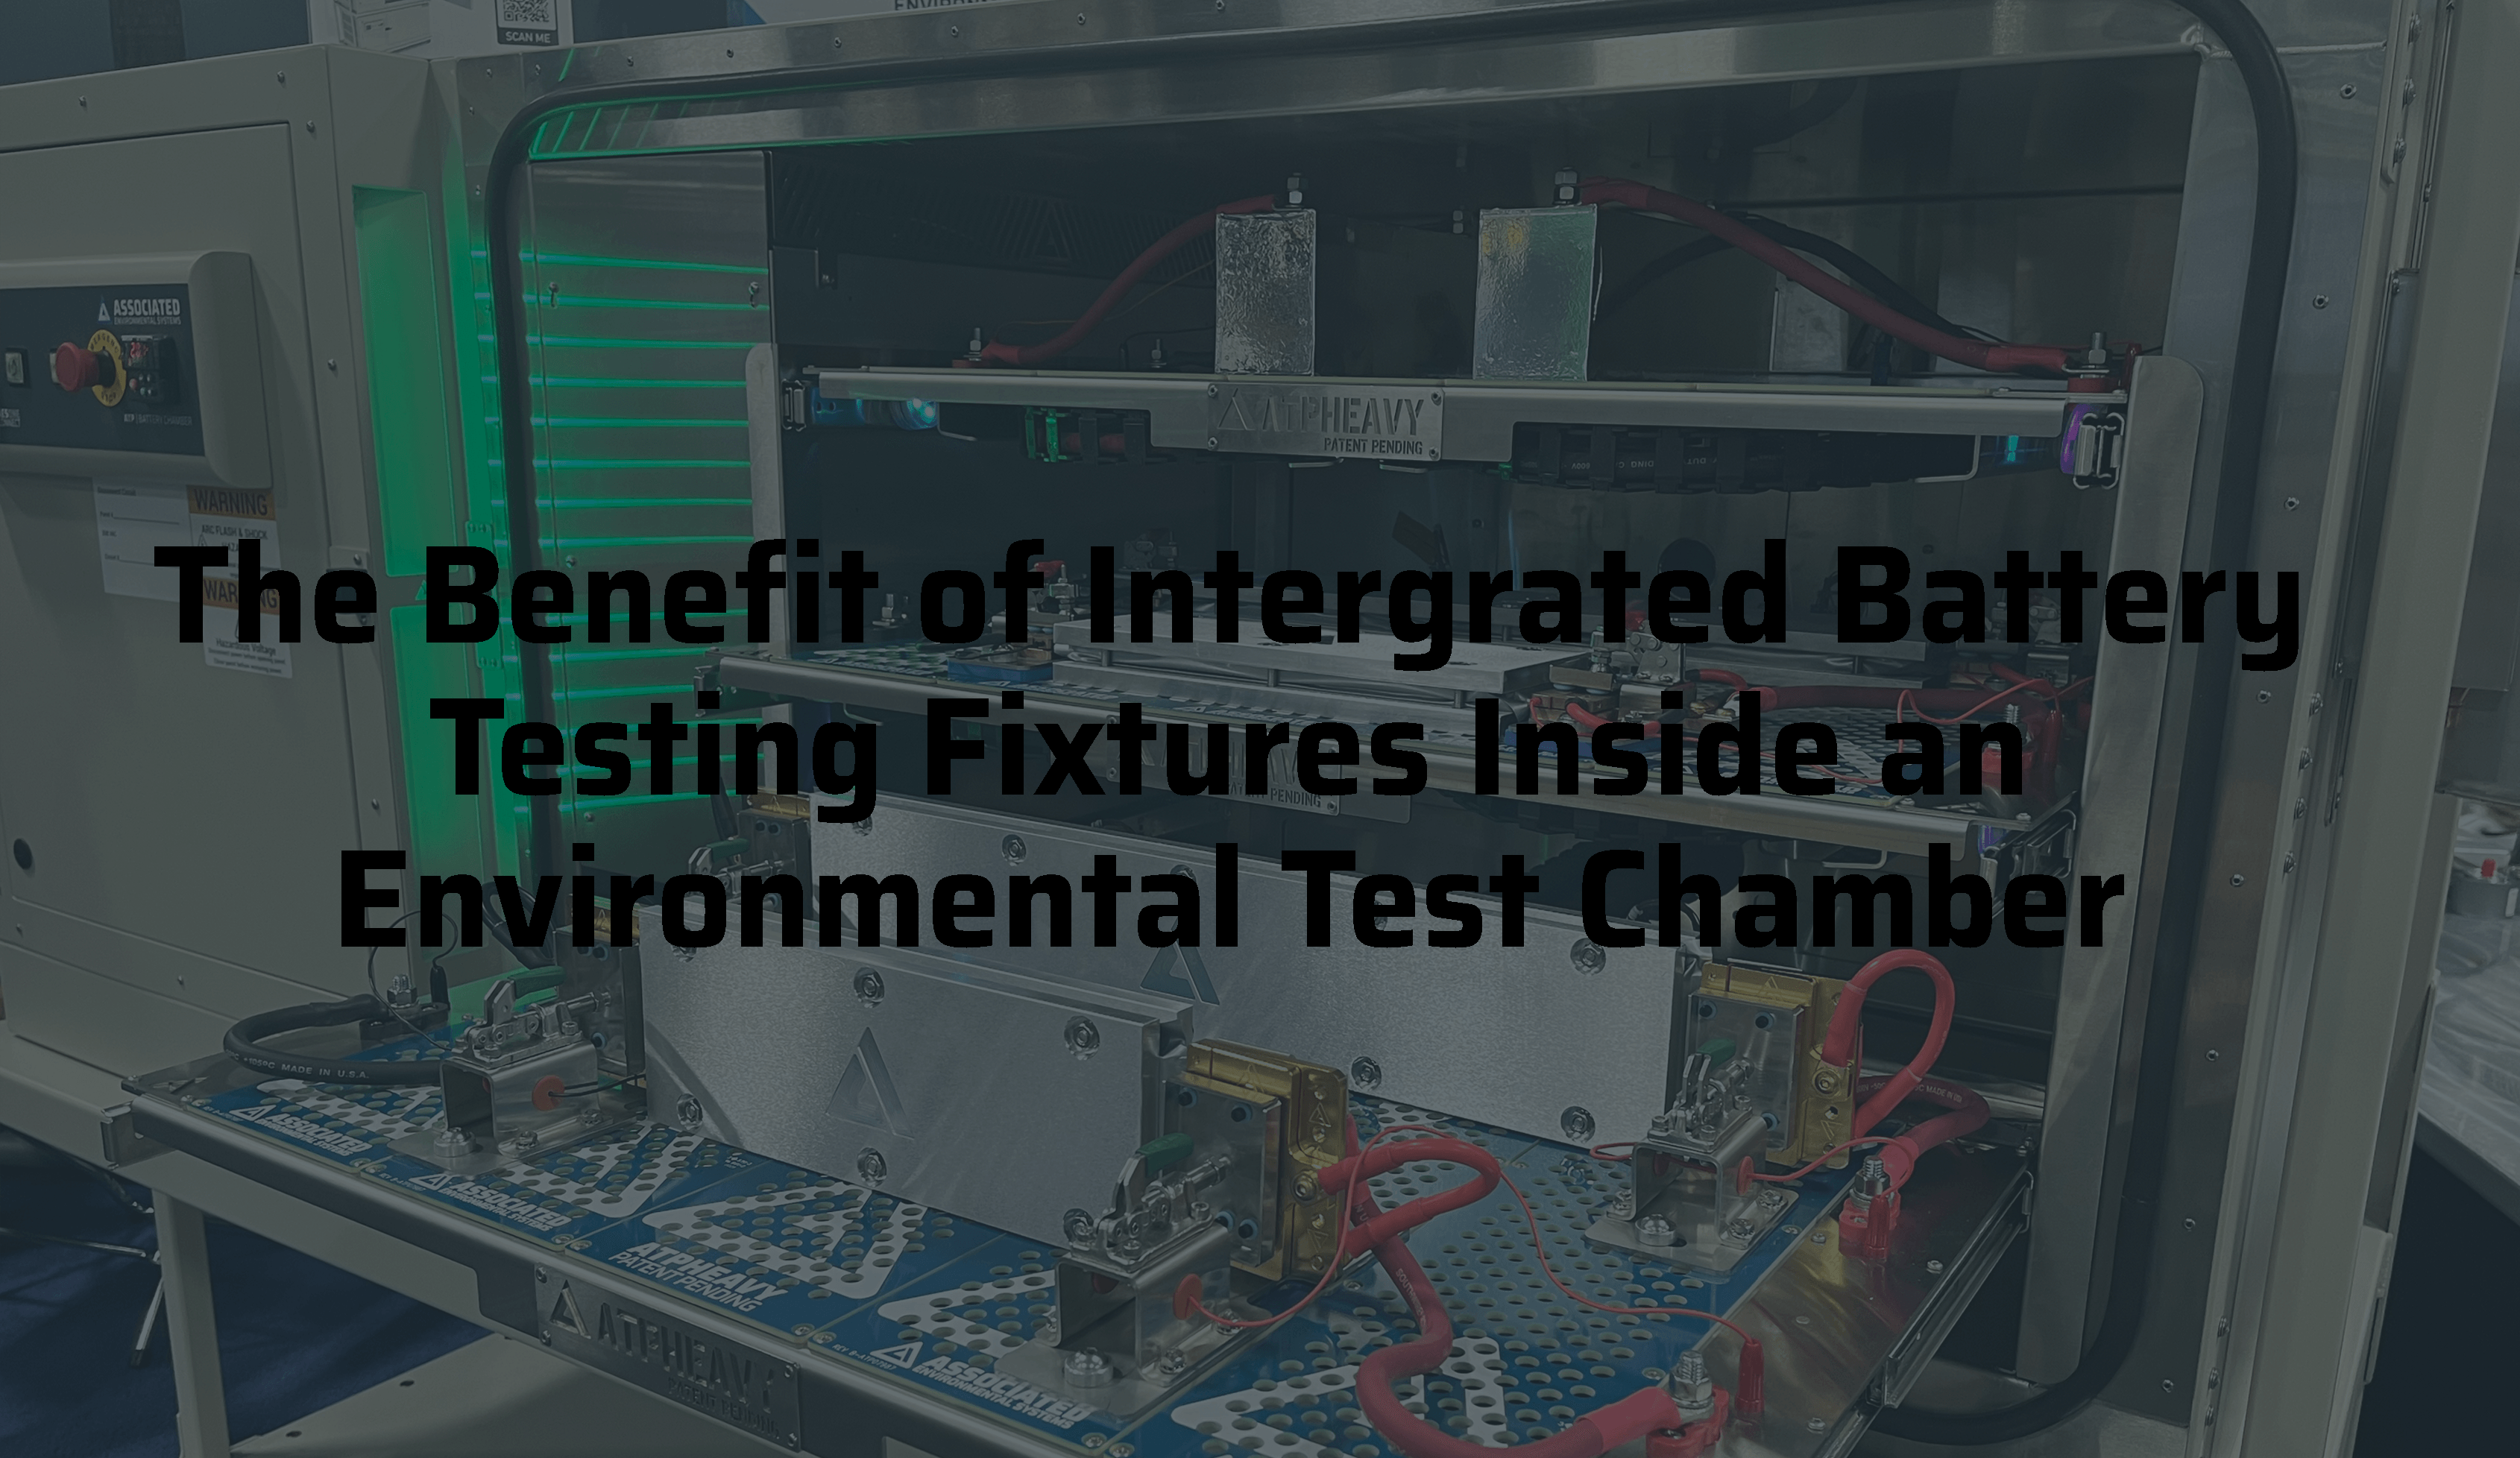 The Benefit of Integrated Battery Testing Fixtures Inside an Environmental Test Chamber